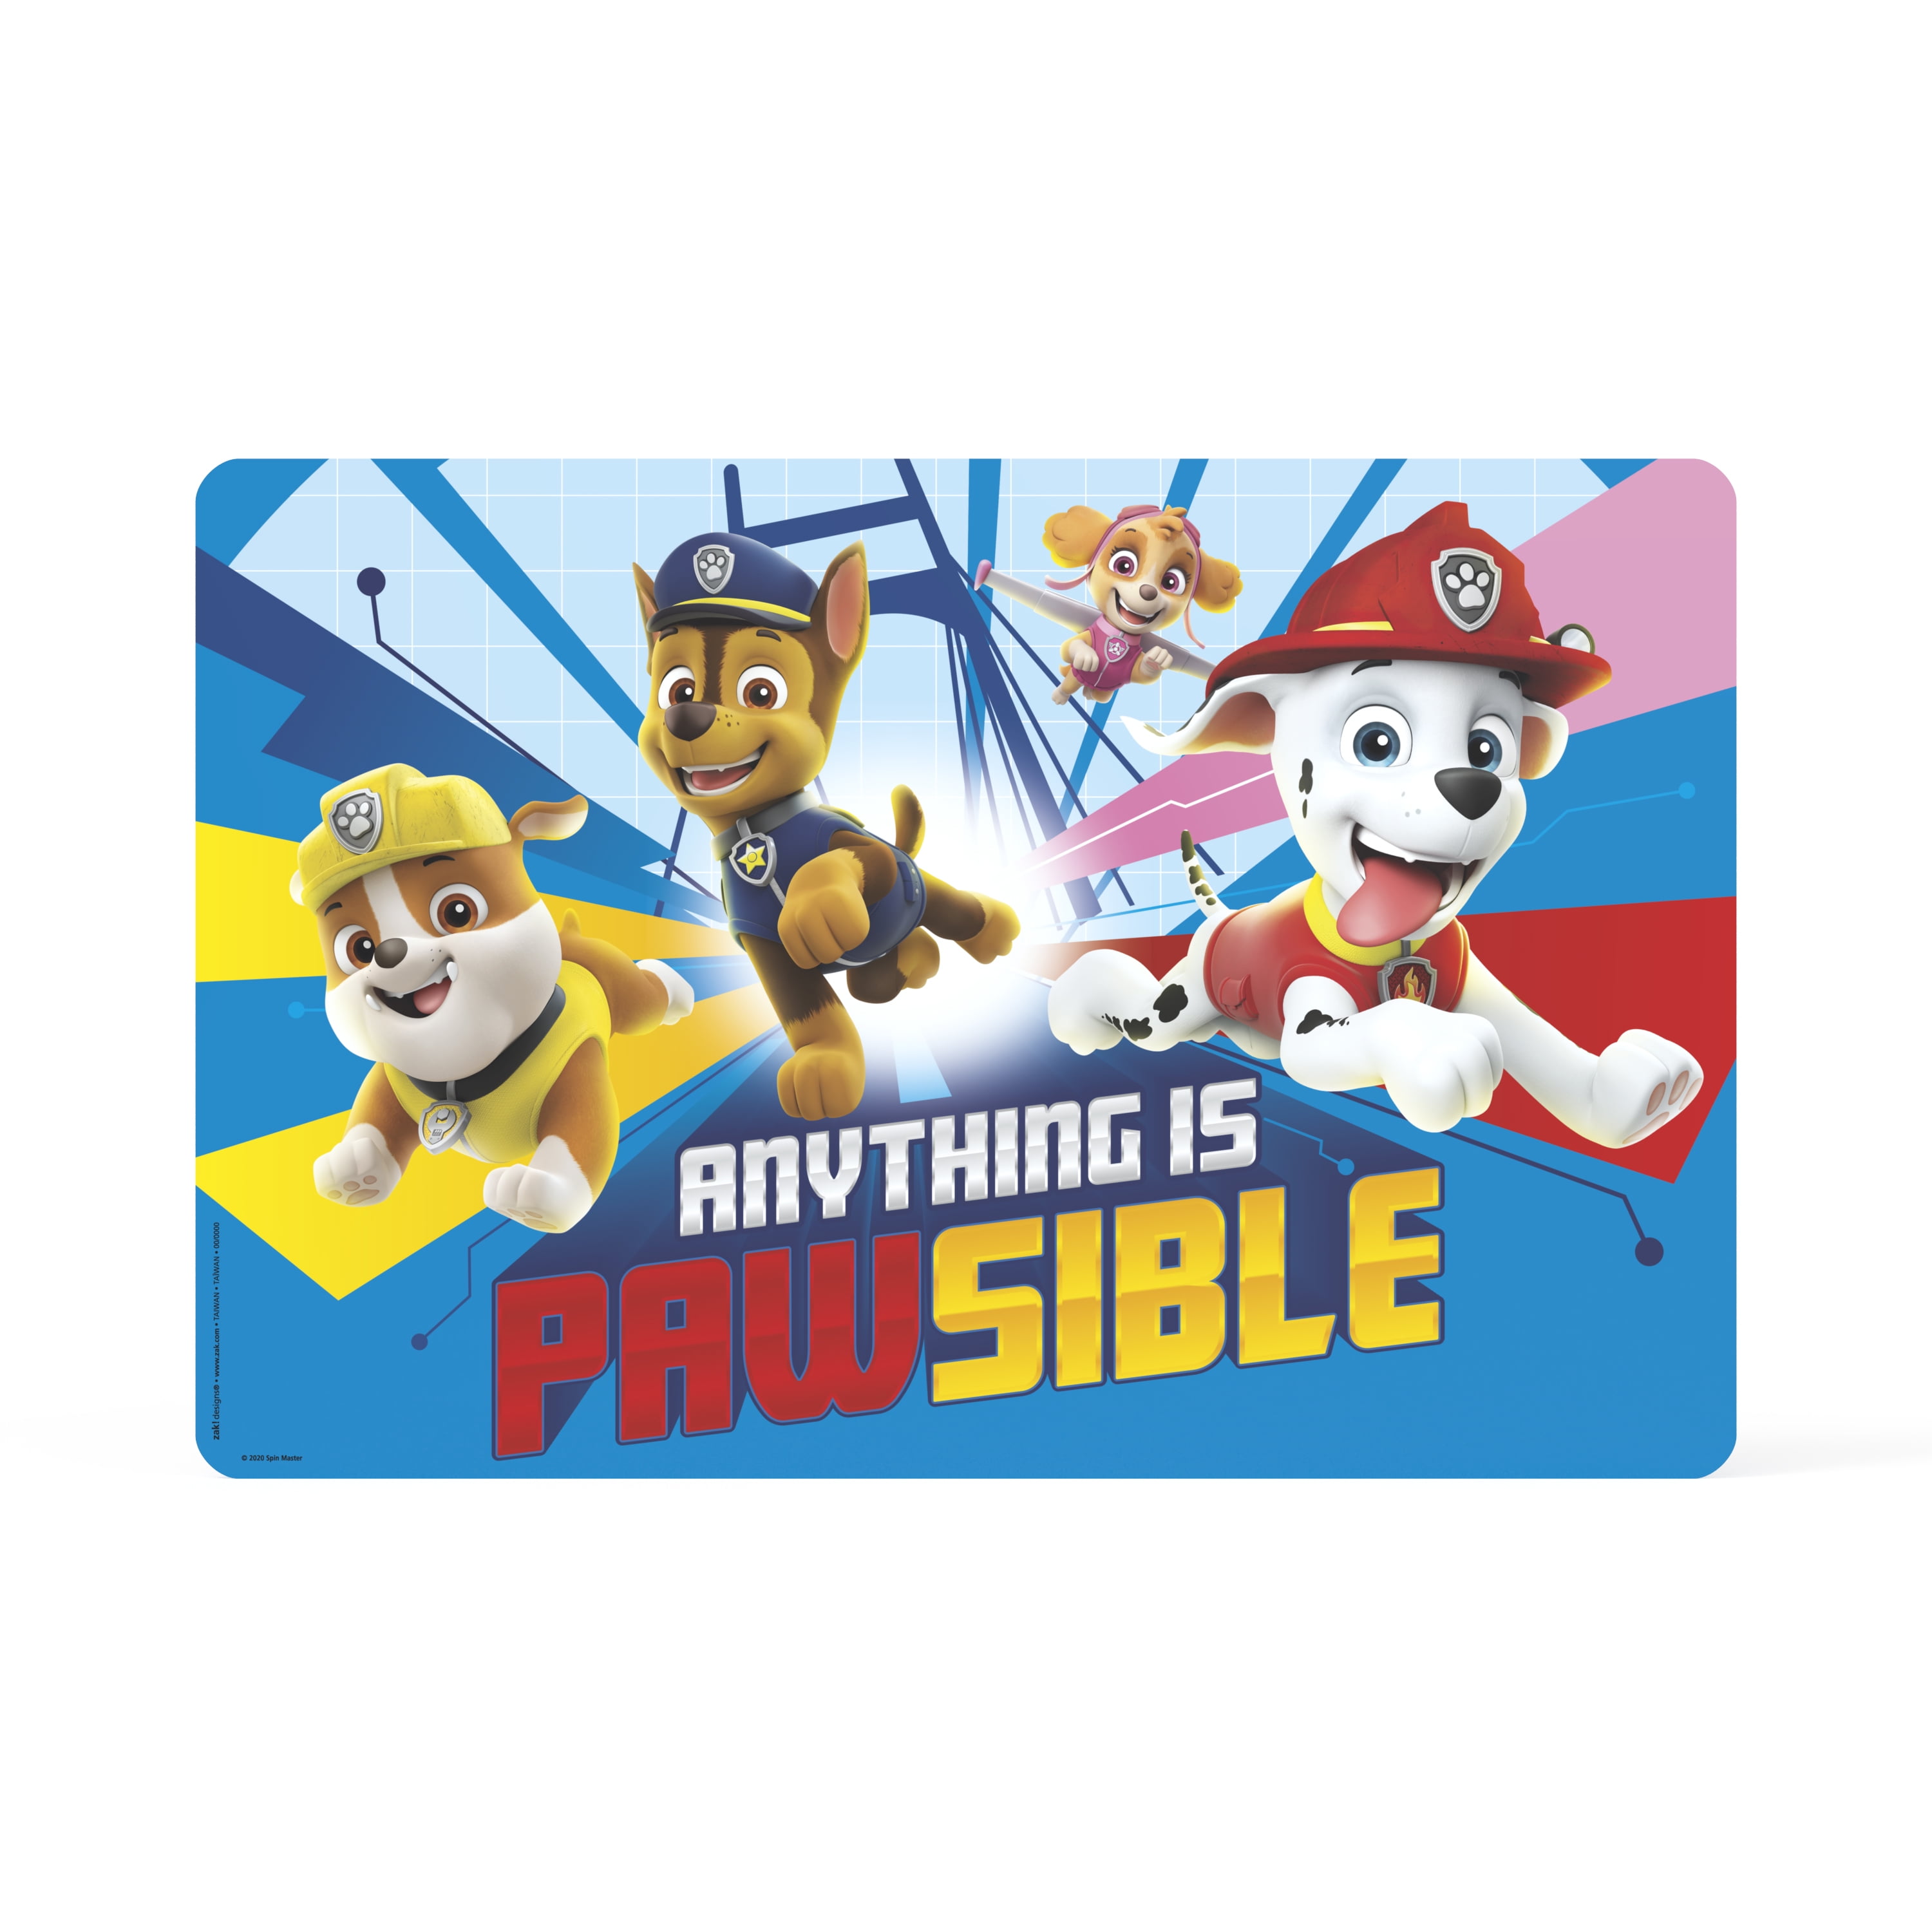 Paw Patrol Placemat Designs May Vary